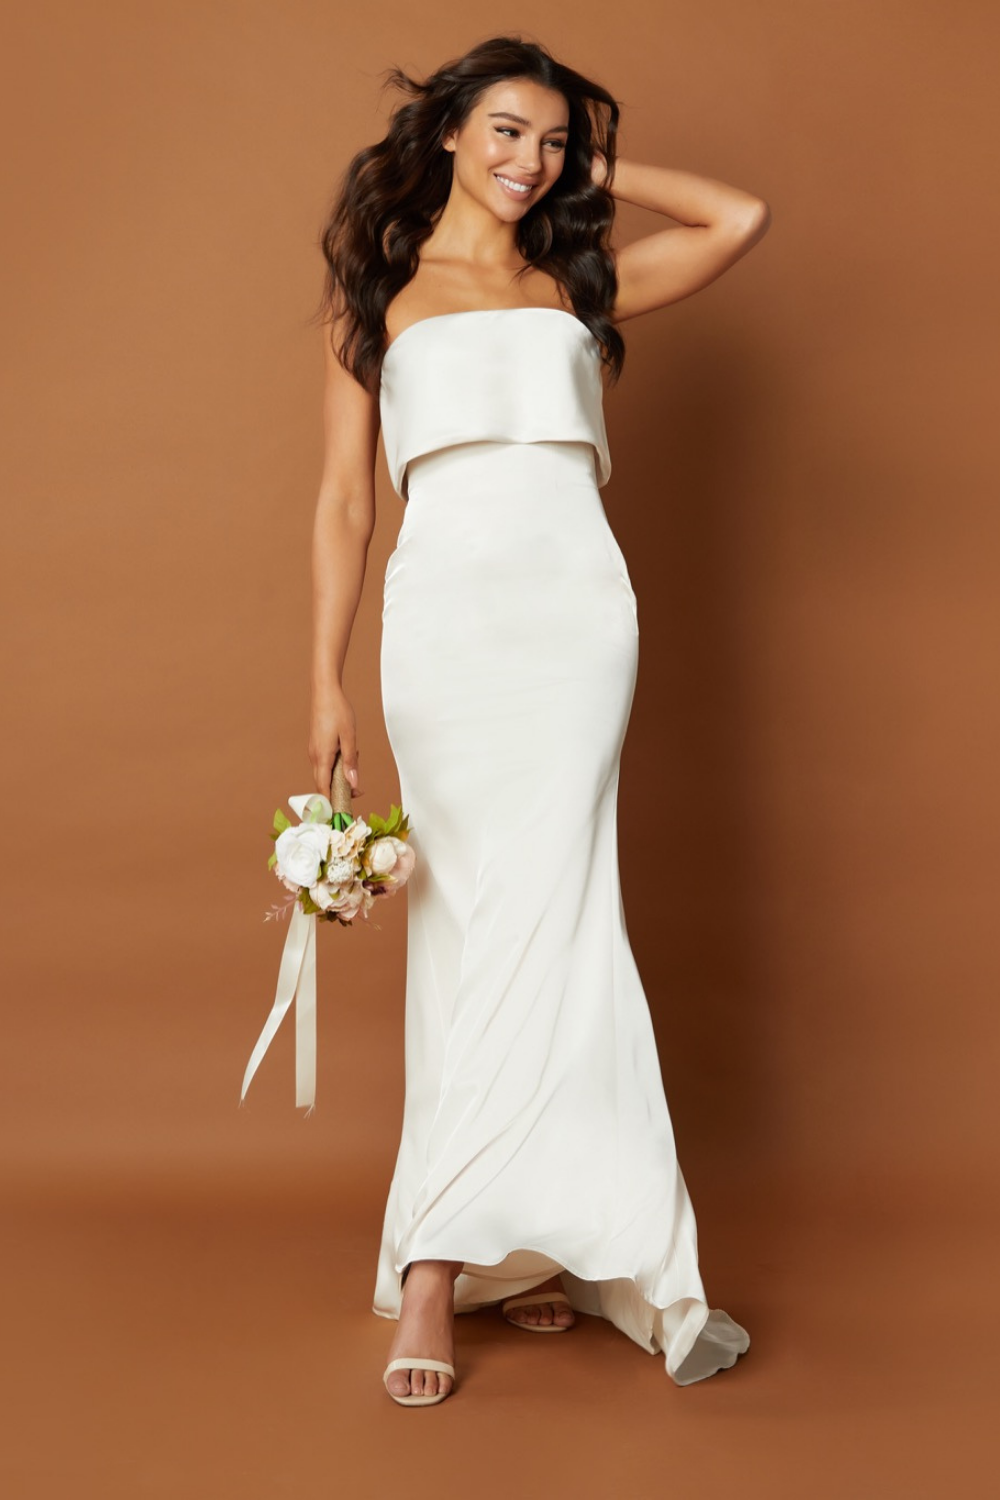 Jetaime Strapless Maxi Dress with Overlay and Button Back Detail, UK 14 / US 10 / EU 42 / Ivory